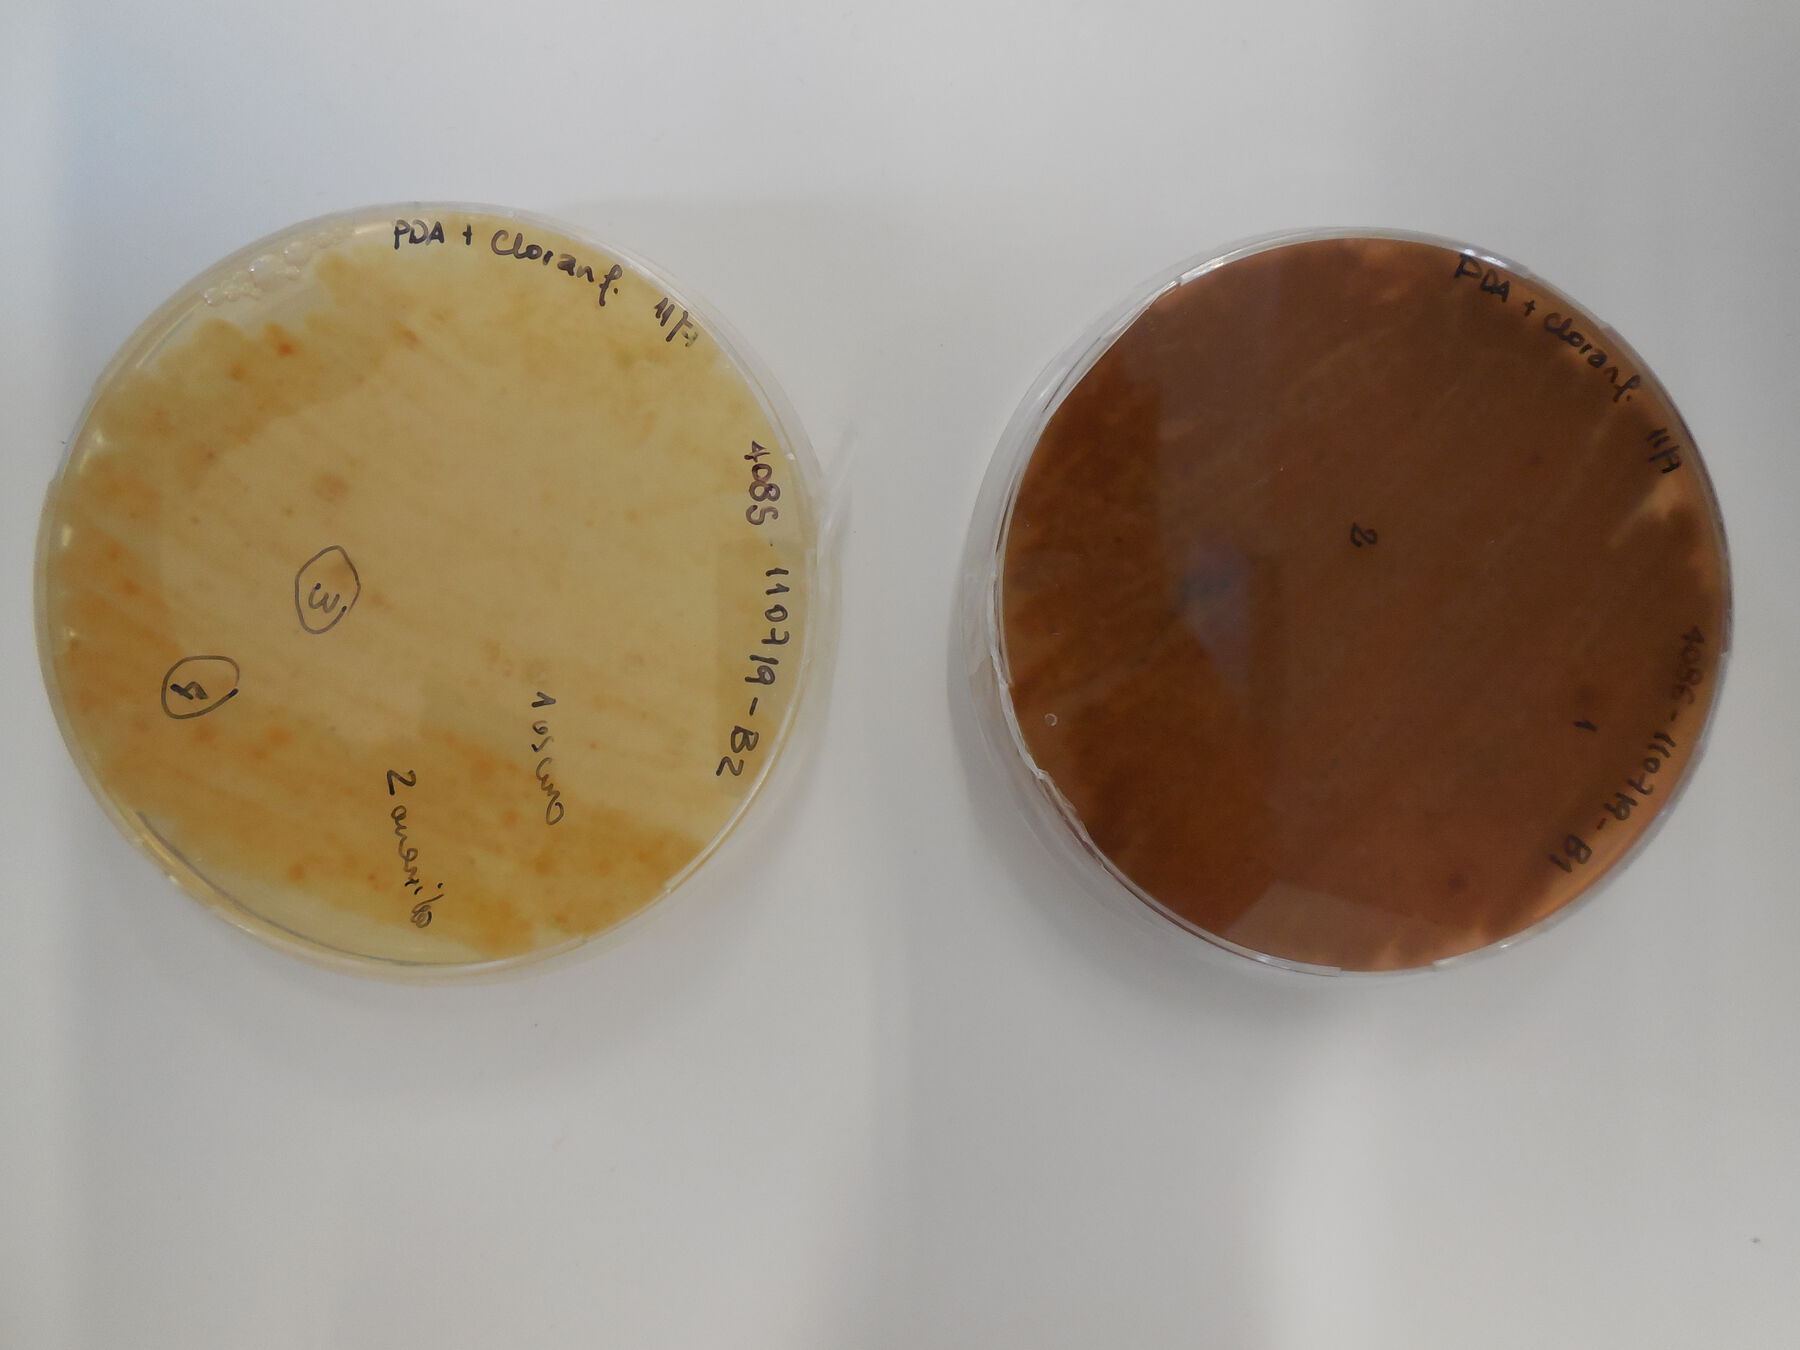 A yellow petri dish with writing on top of it and a brown petri dish